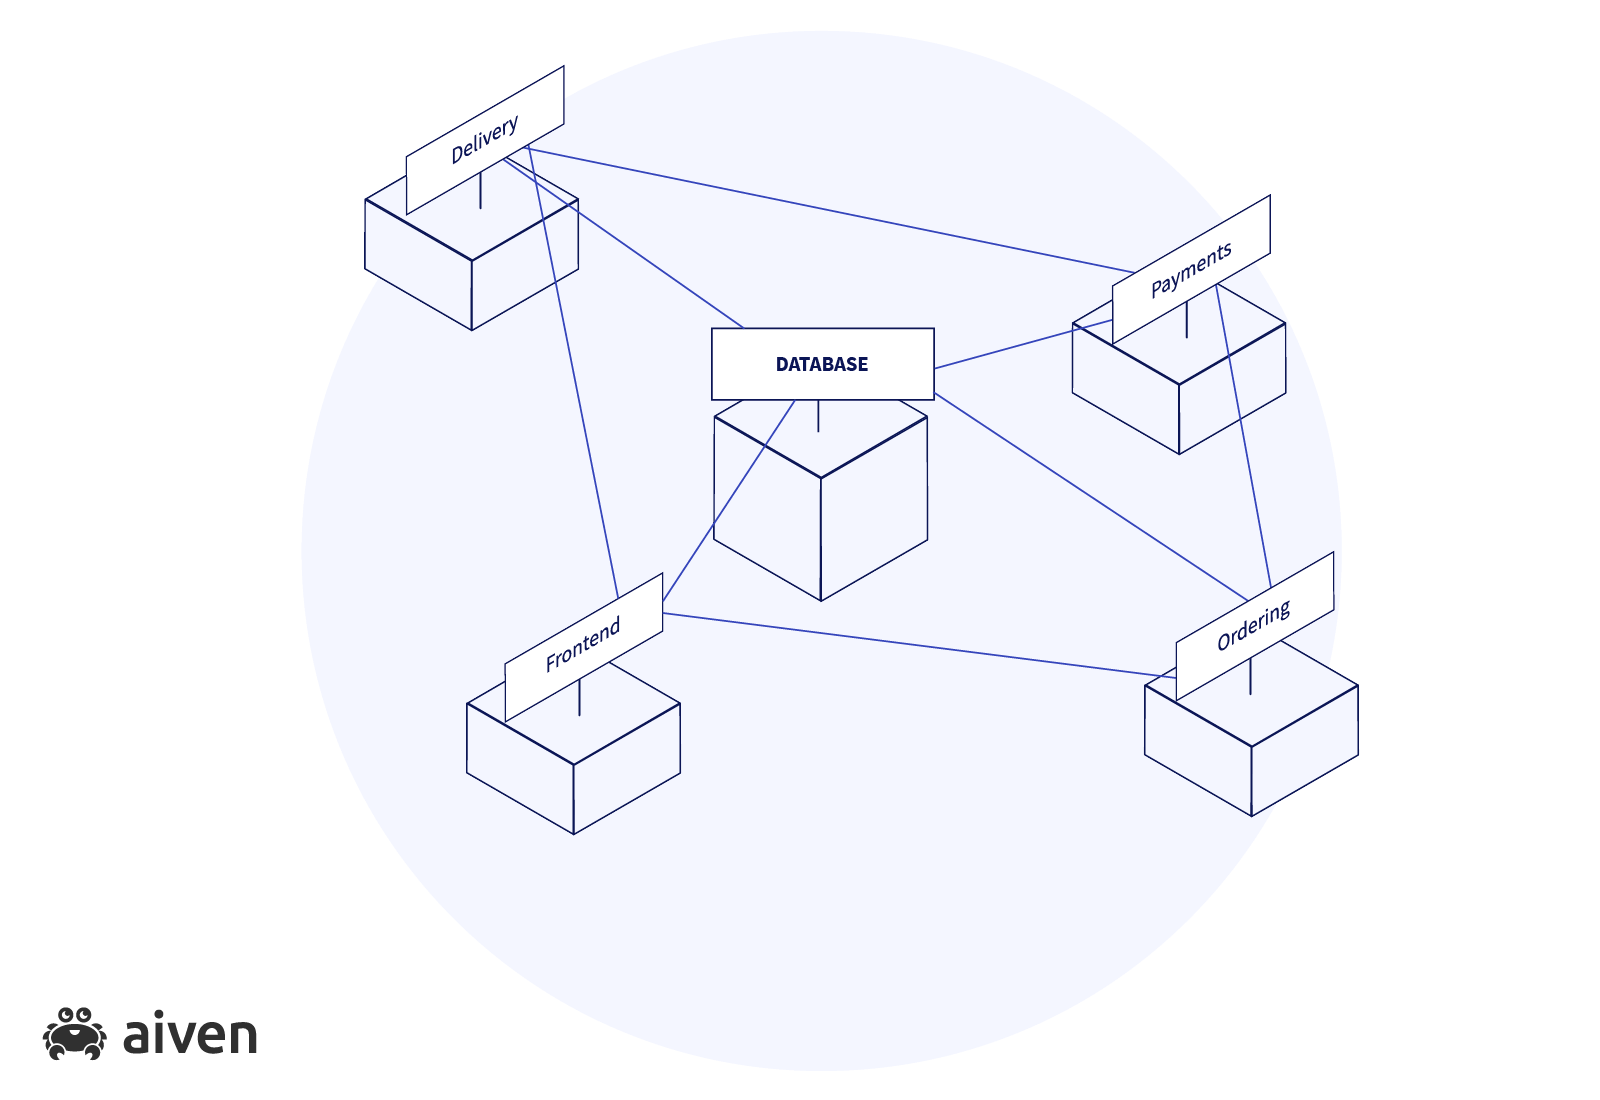 Diagram of a simple monolith - a database is connected to services called frontend, delivery, payments and ordering, each of which is also connected to some of the others